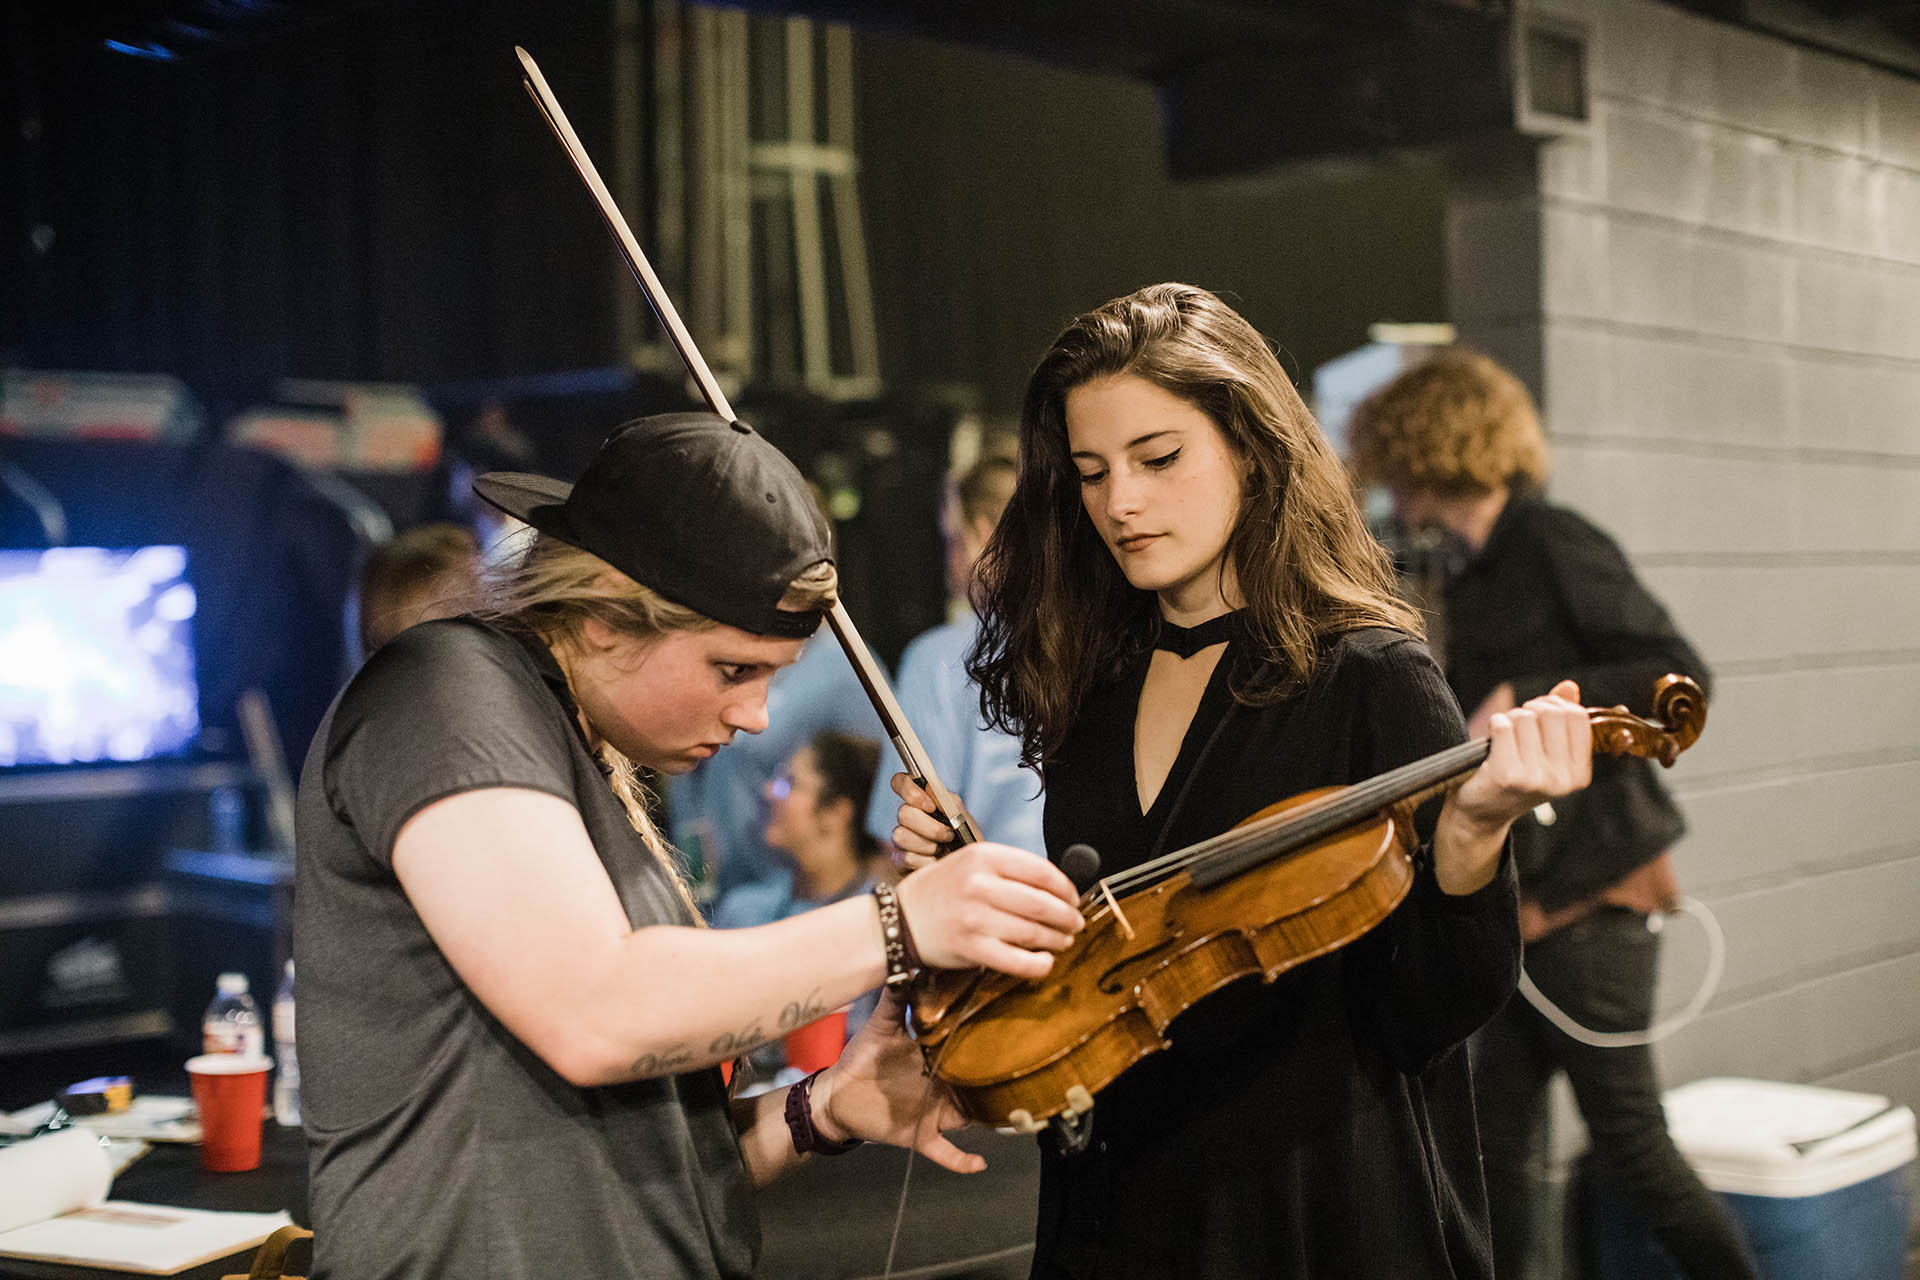 Concert photos Dallas Photographer; candid photo of a roadie and violinist preparing a violin for a performance backstage.